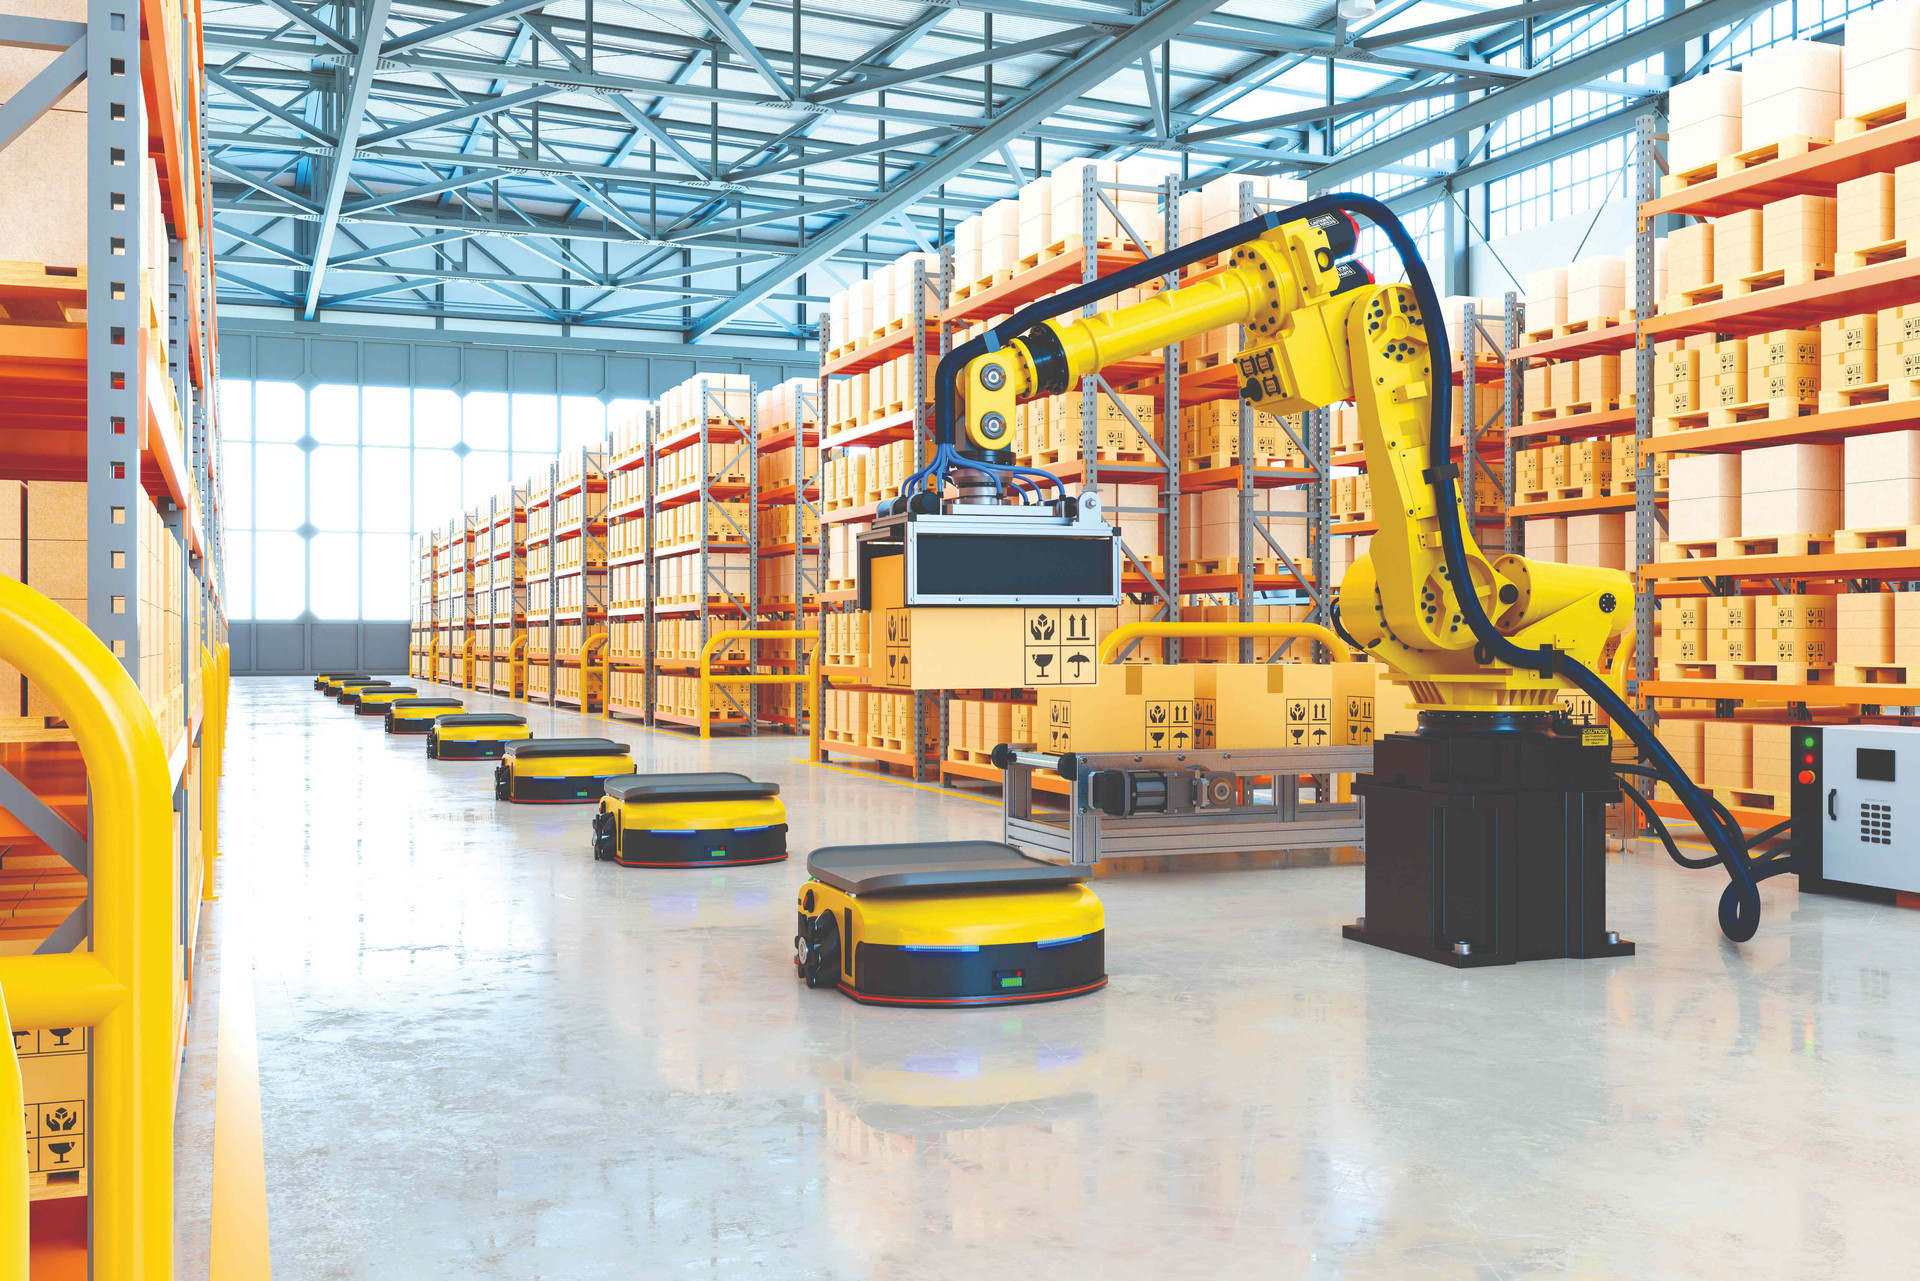 robotic-arm-packing-with-producing-maintaining-logistics-systems3d-rendering-compressed.jpg